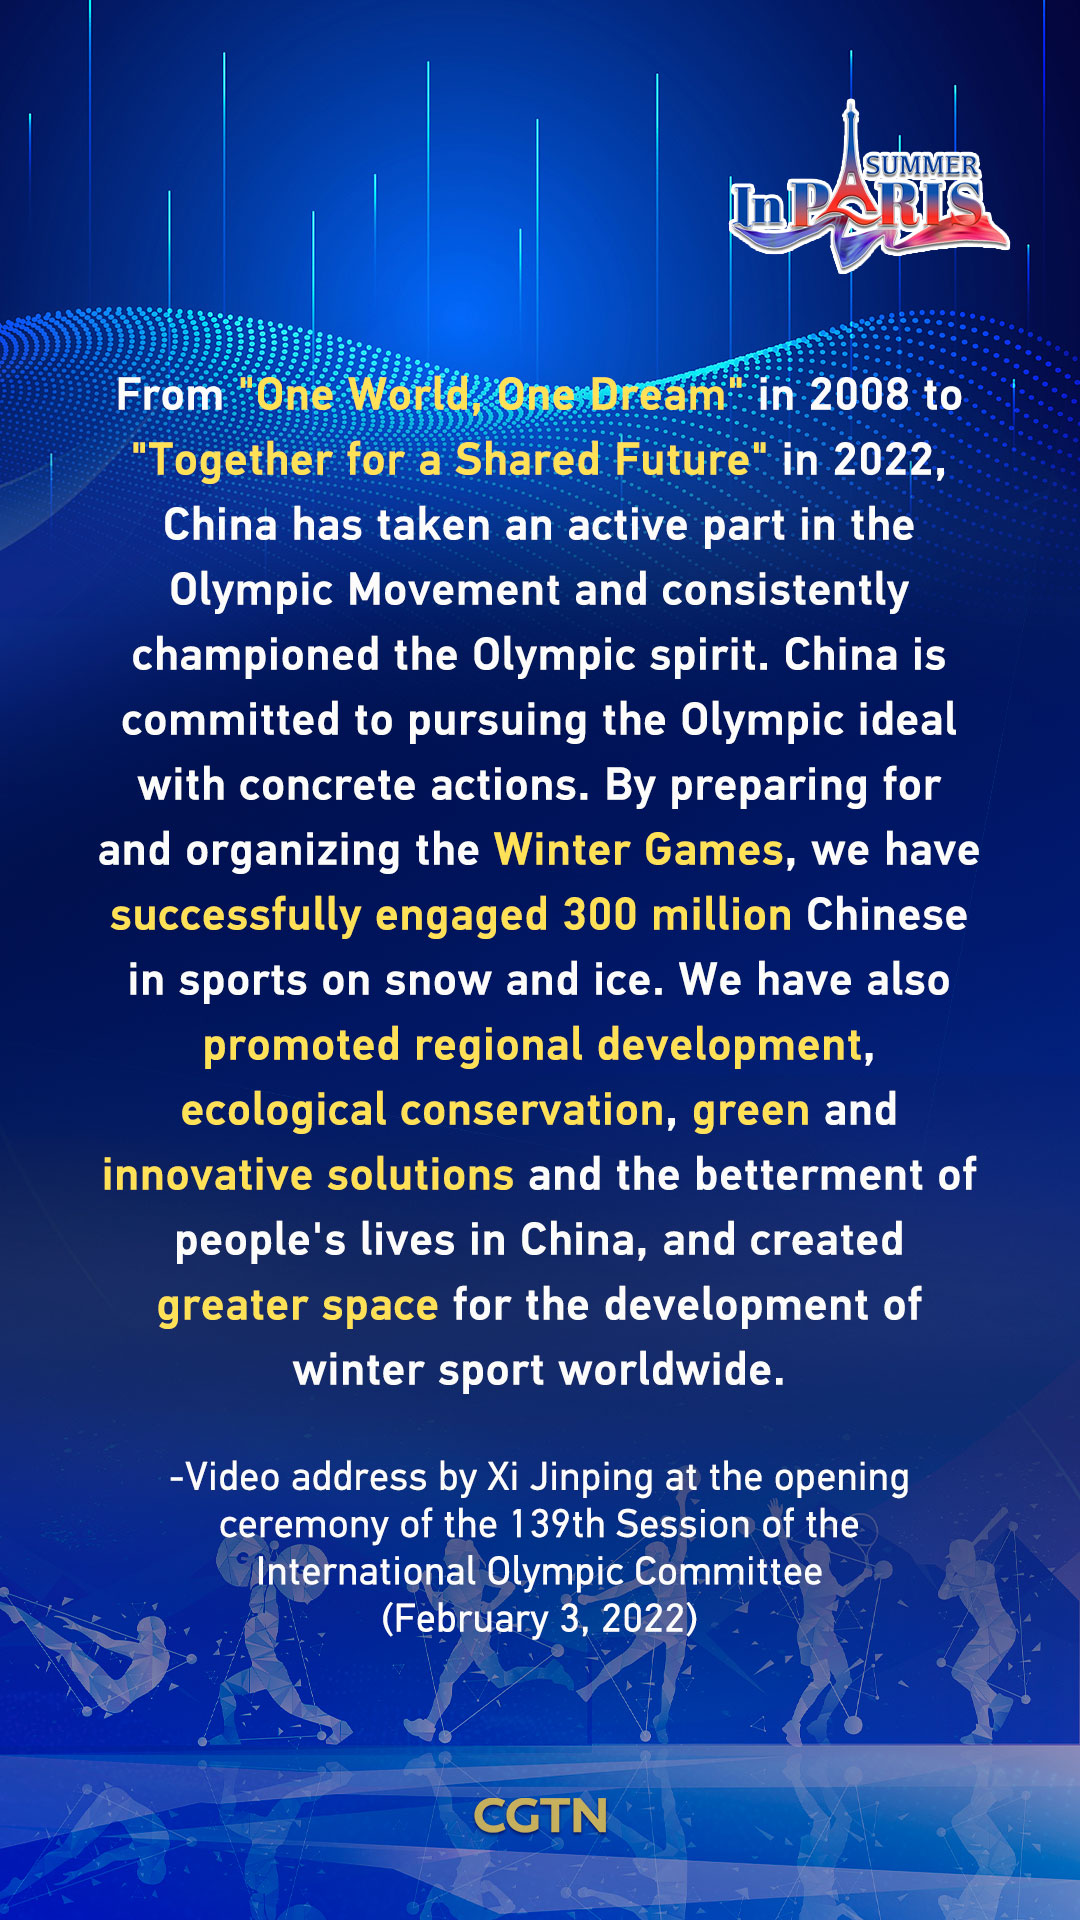 Xi Jinping's key quotes on carrying forward the Olympic spirit